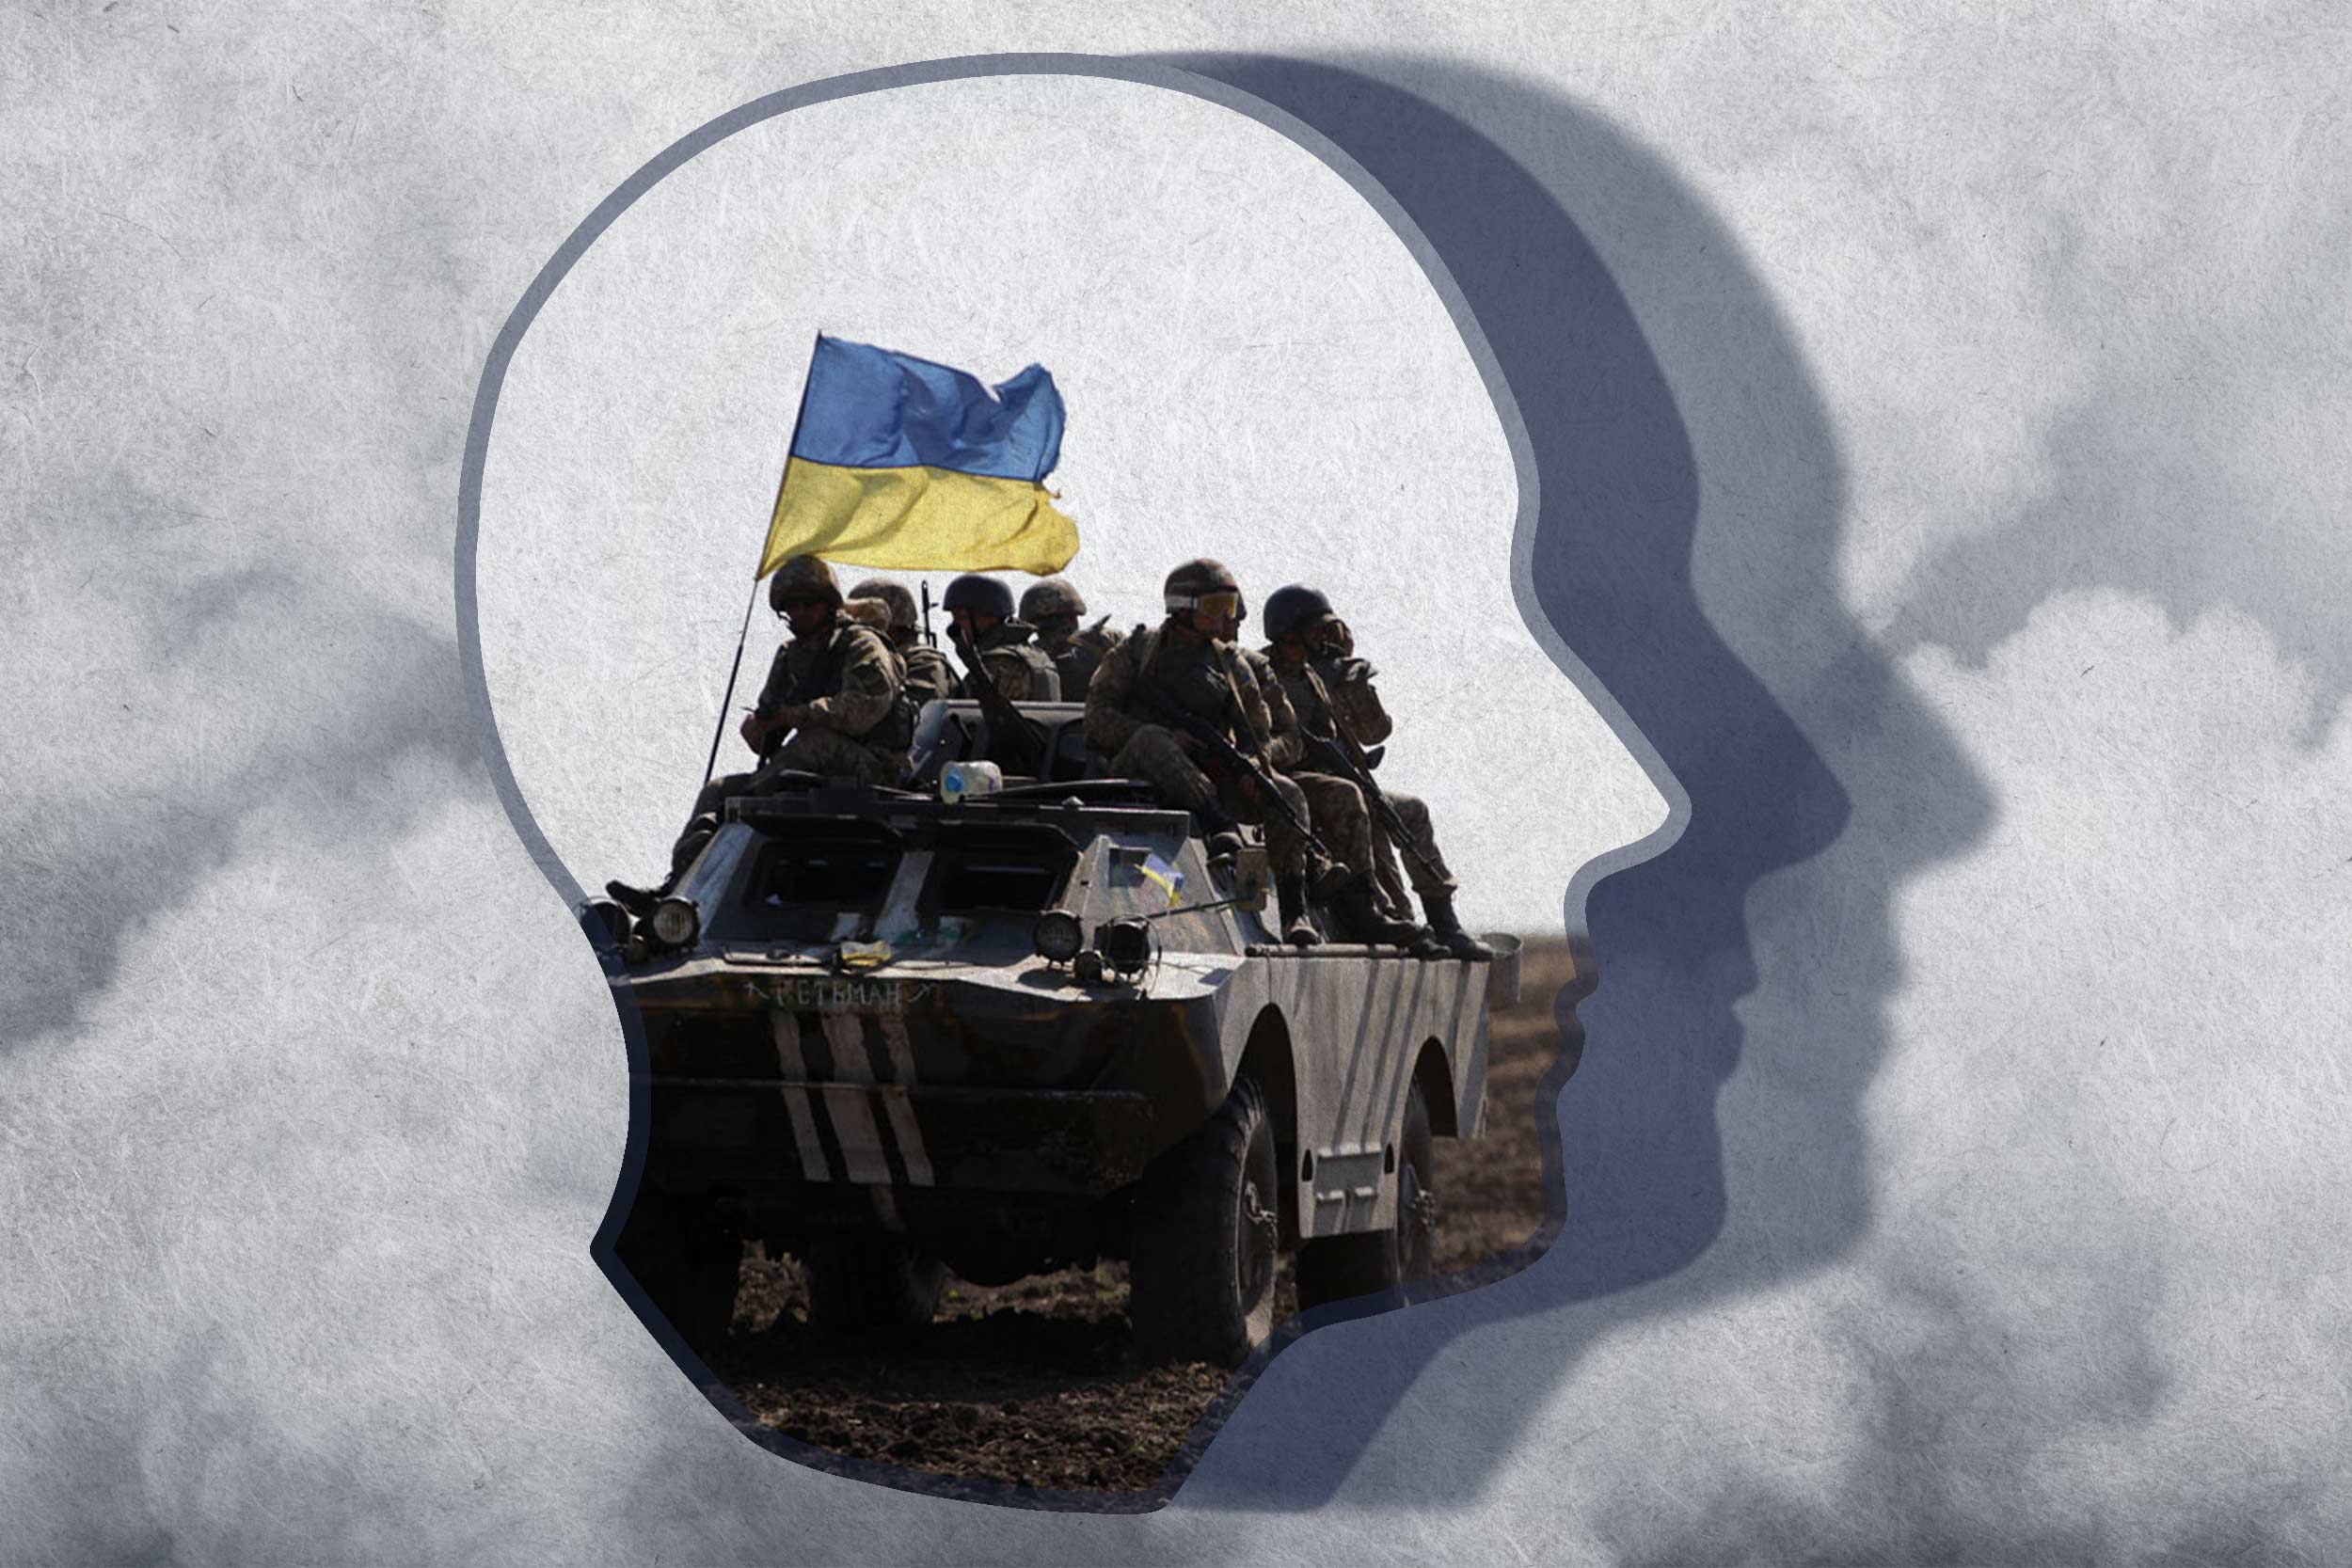 A shadowed outline of a human side profile with an image of Ukraine soldiers riding on a vehicle with the Ukraine flag